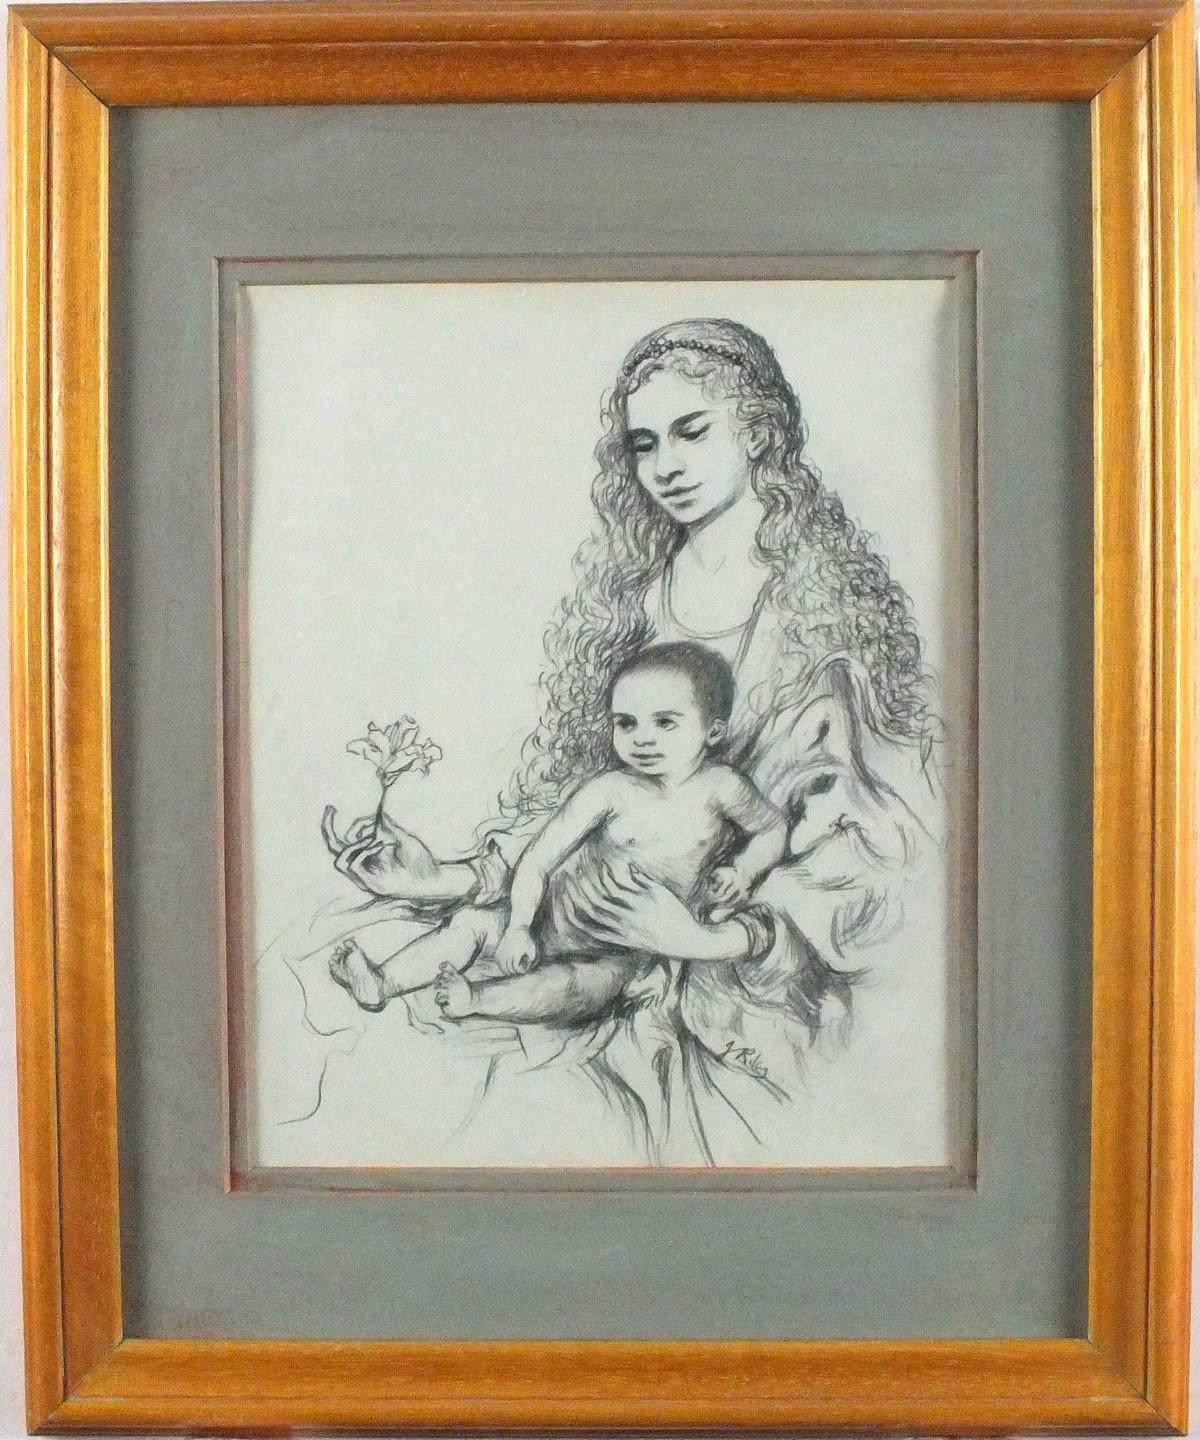 Joan RILEY (1920-2015), Pen & Indian ink drawing, Mother & child, Signed, 9.5" x 7.75" (24.1cm x - Image 2 of 2